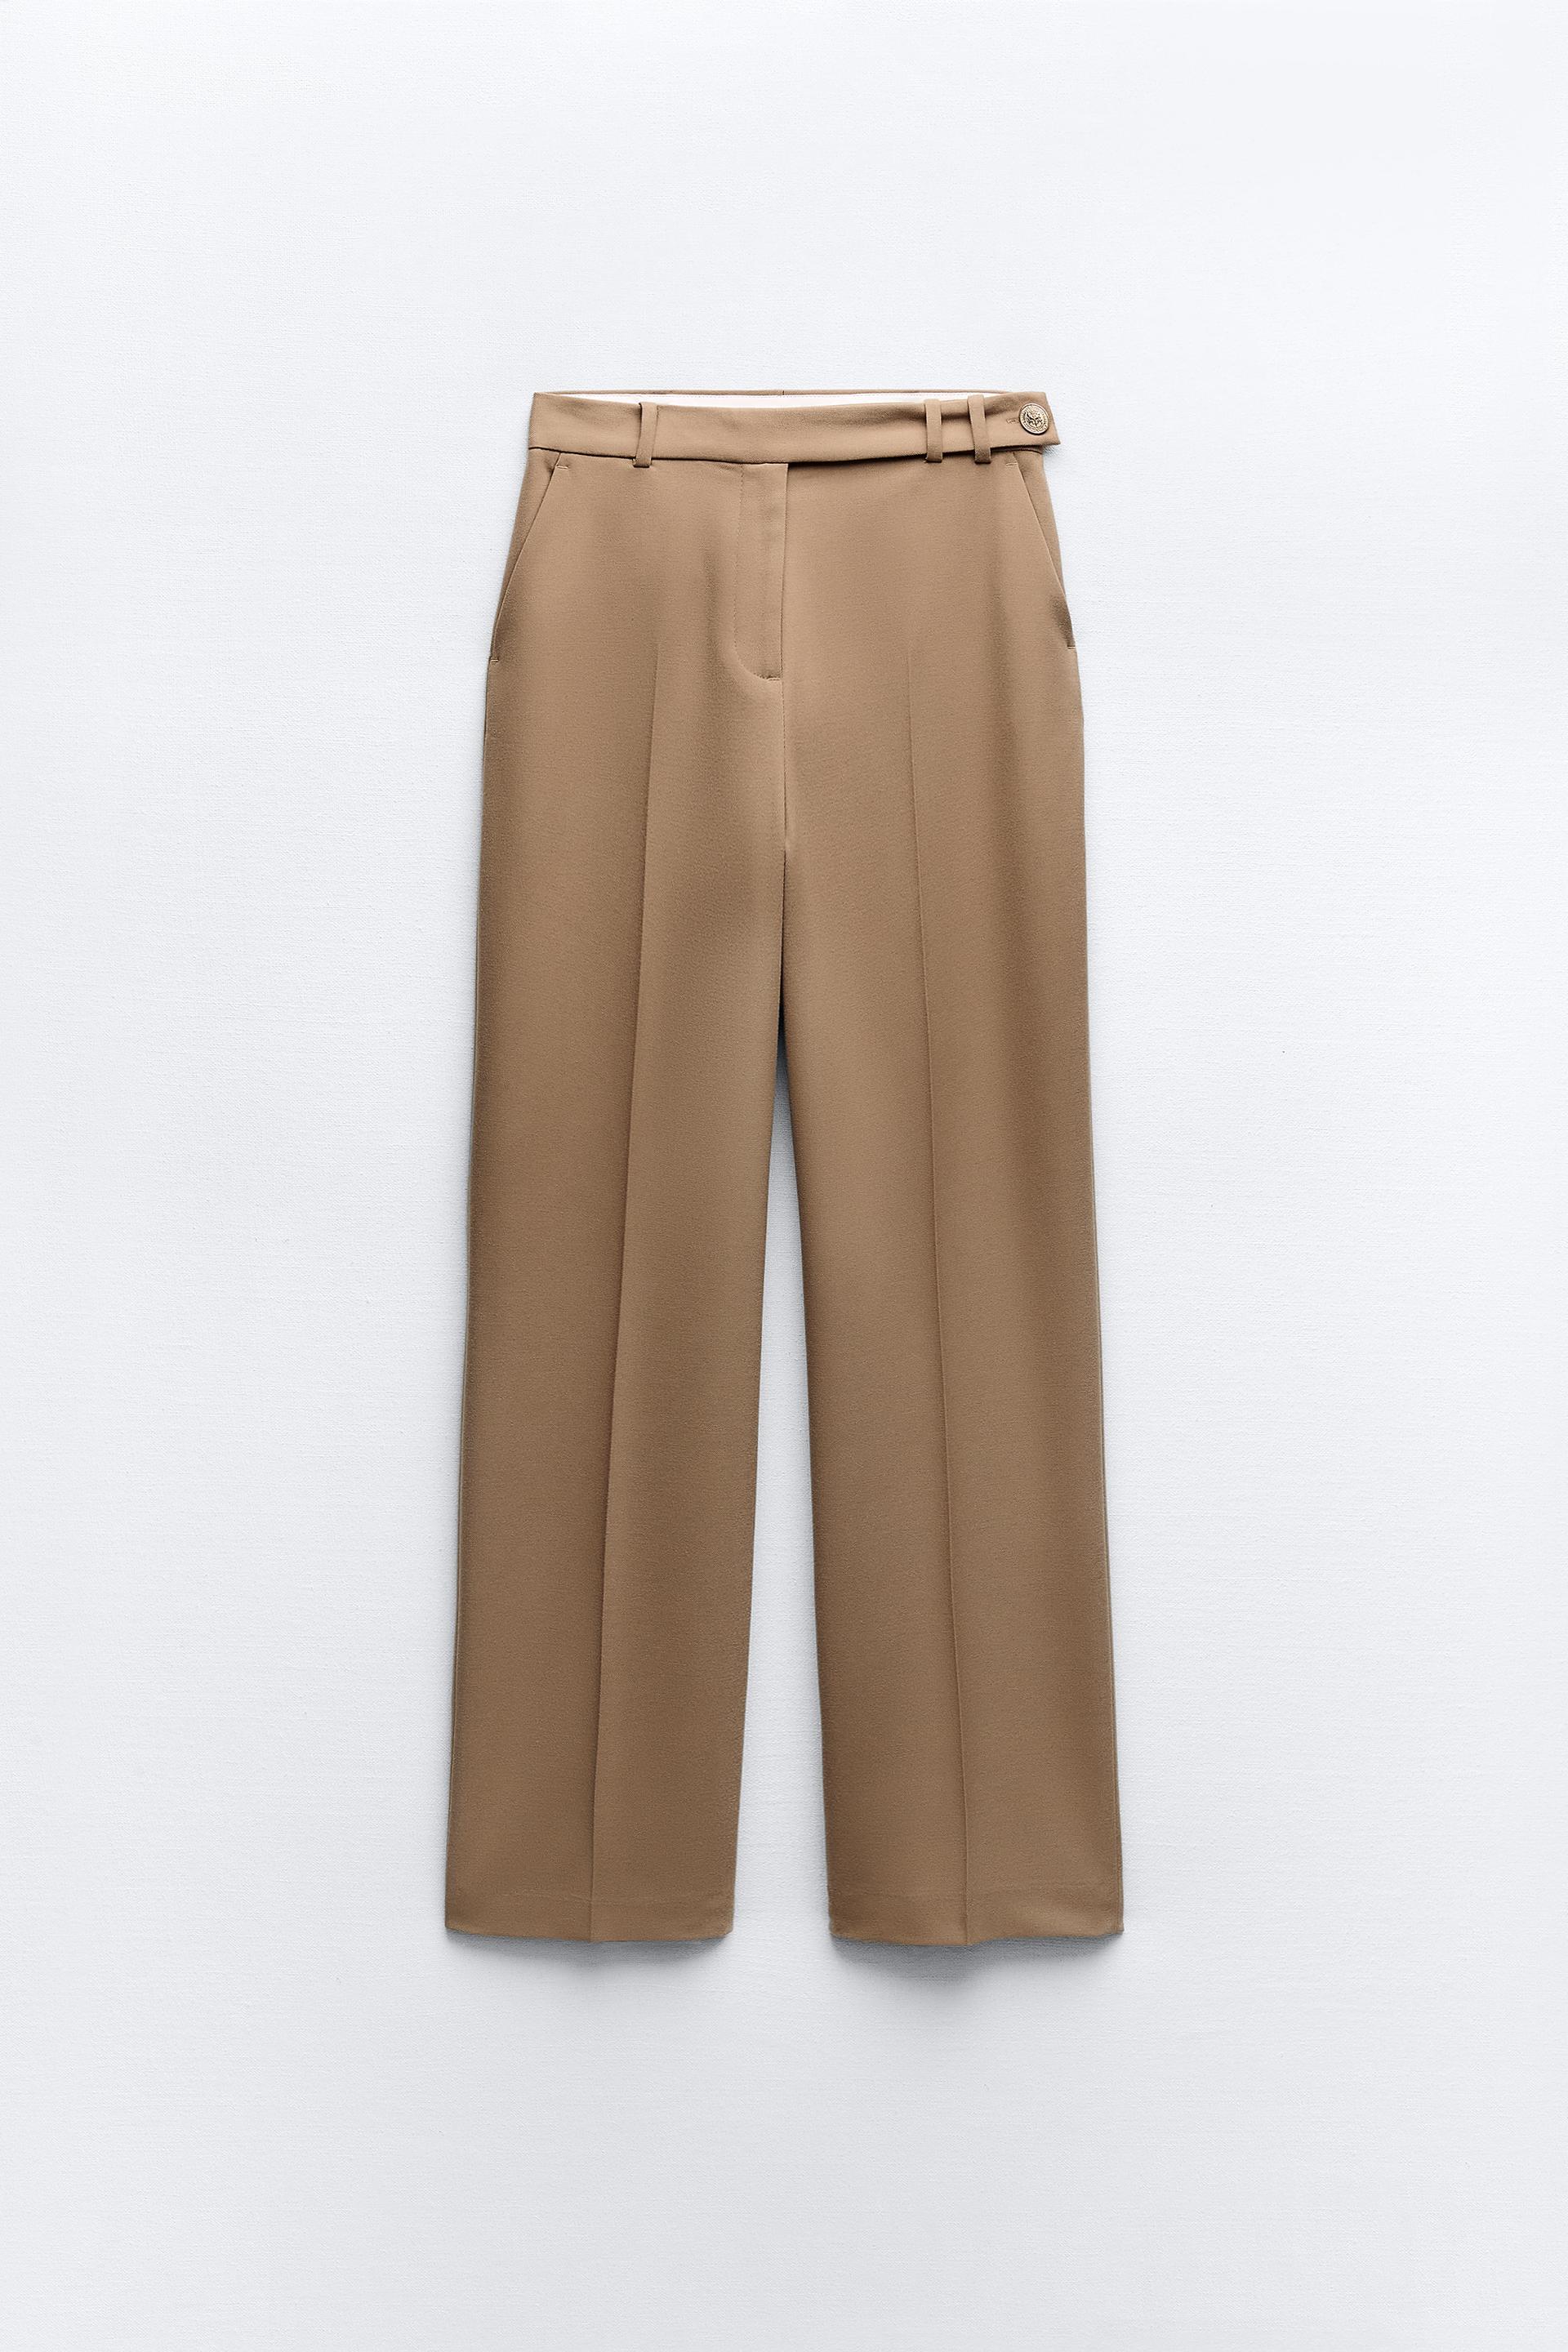 ZARA Women’s Wide Leg Pareo Pants Trousers In Sand Size XL - New with Tags